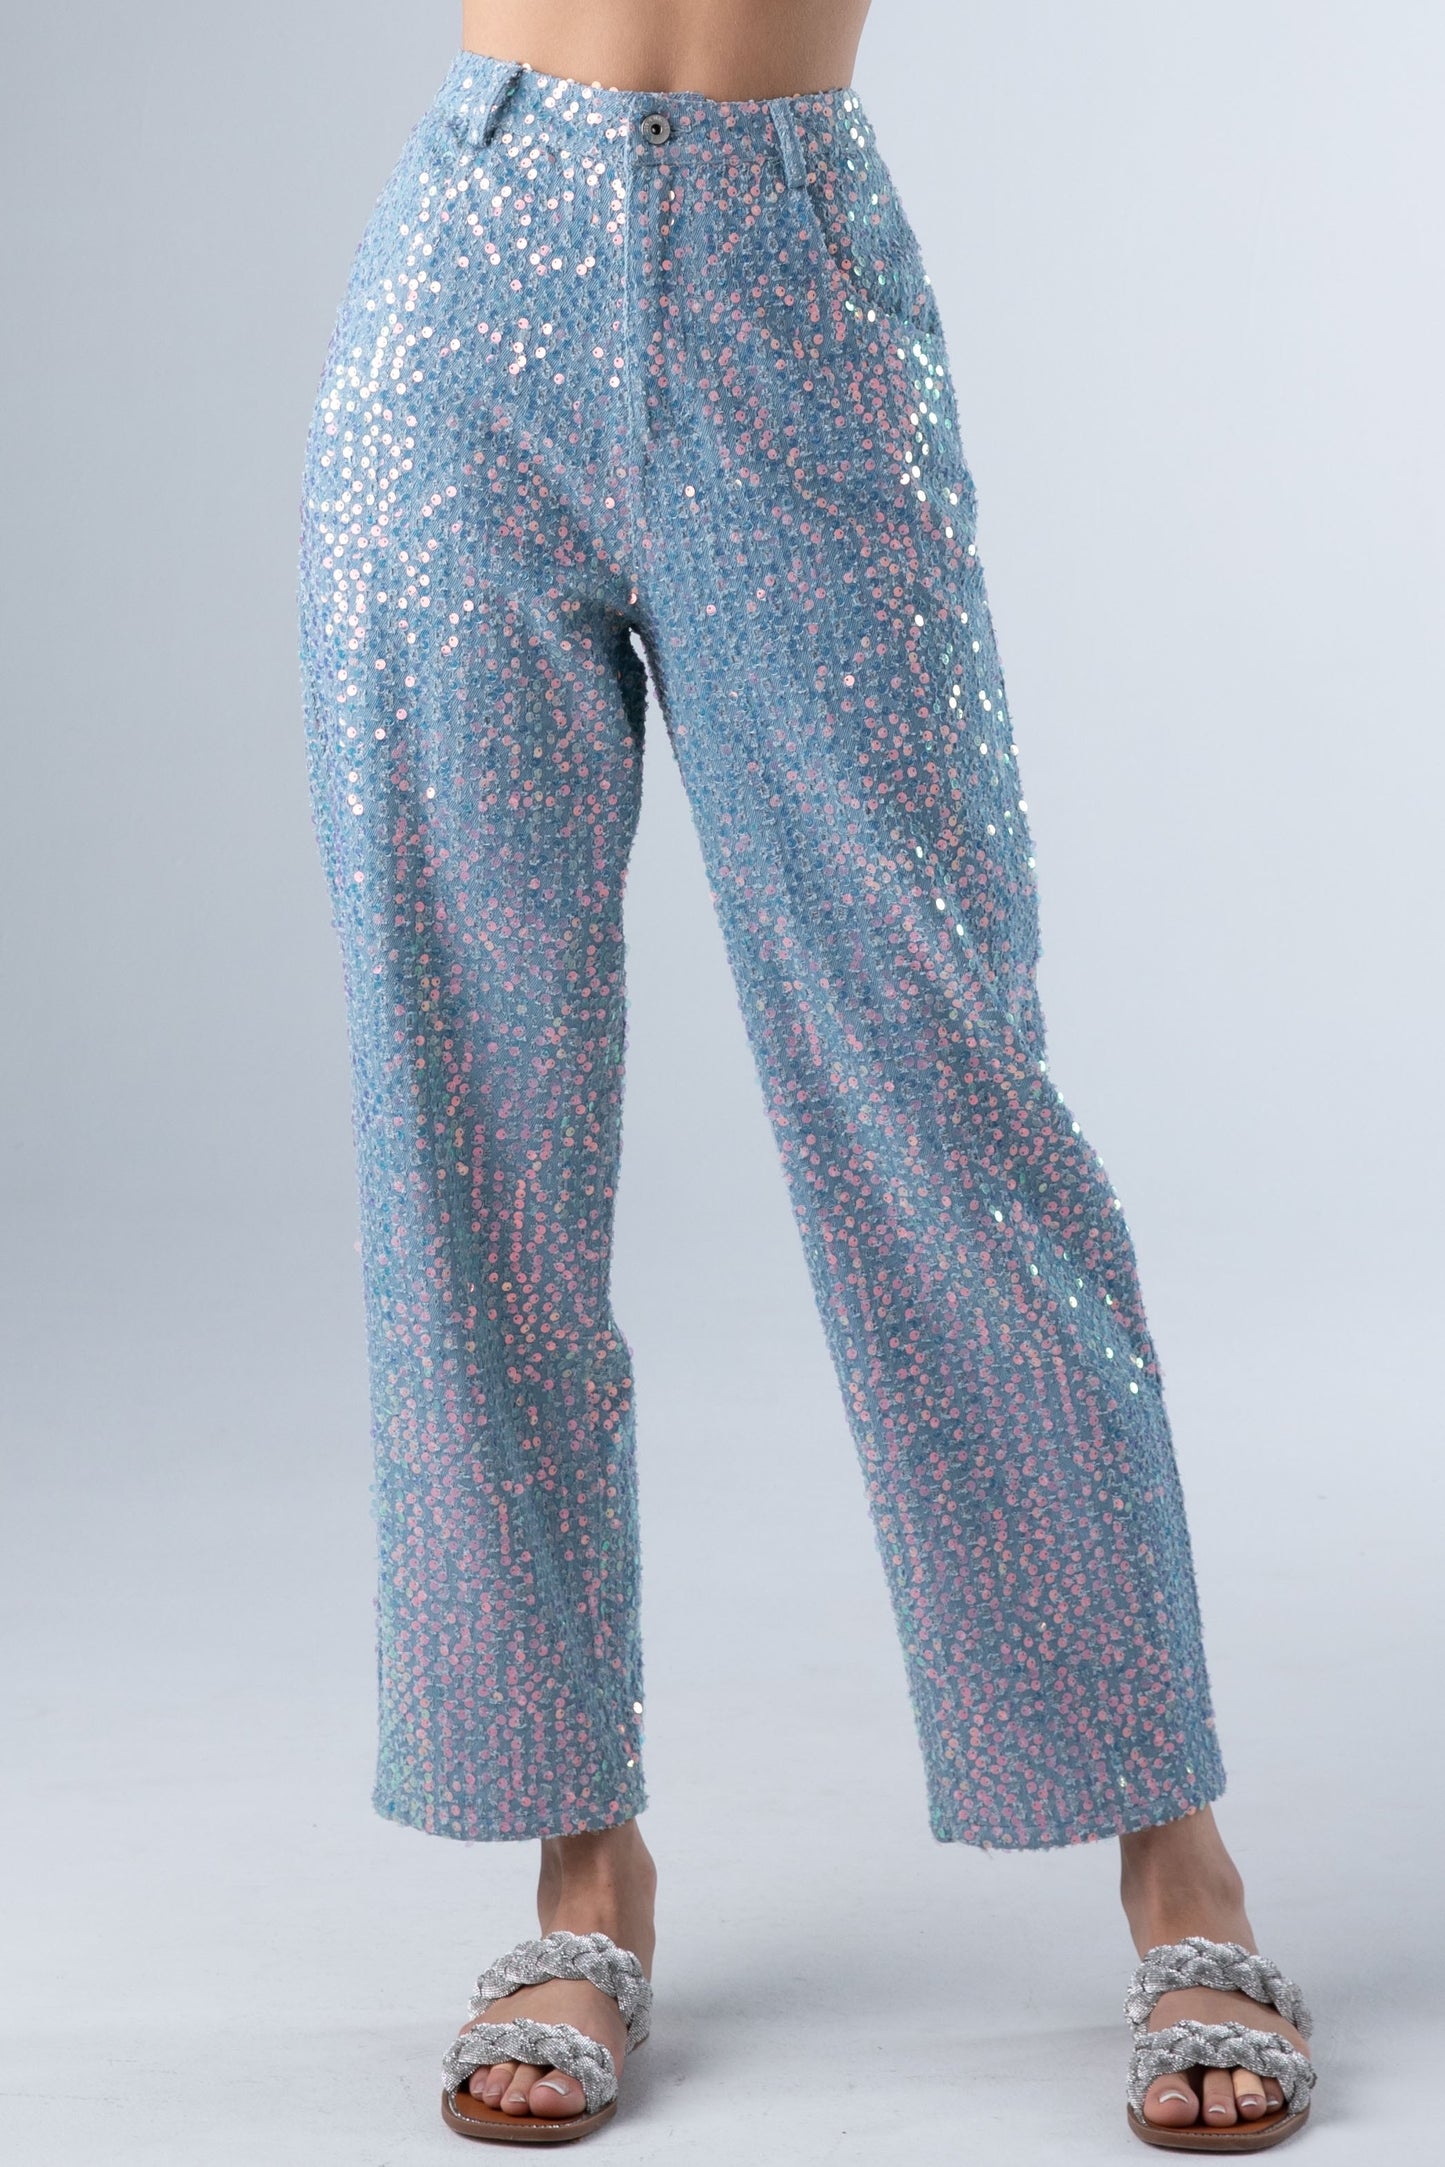 The Lizzie Sequin Jeans